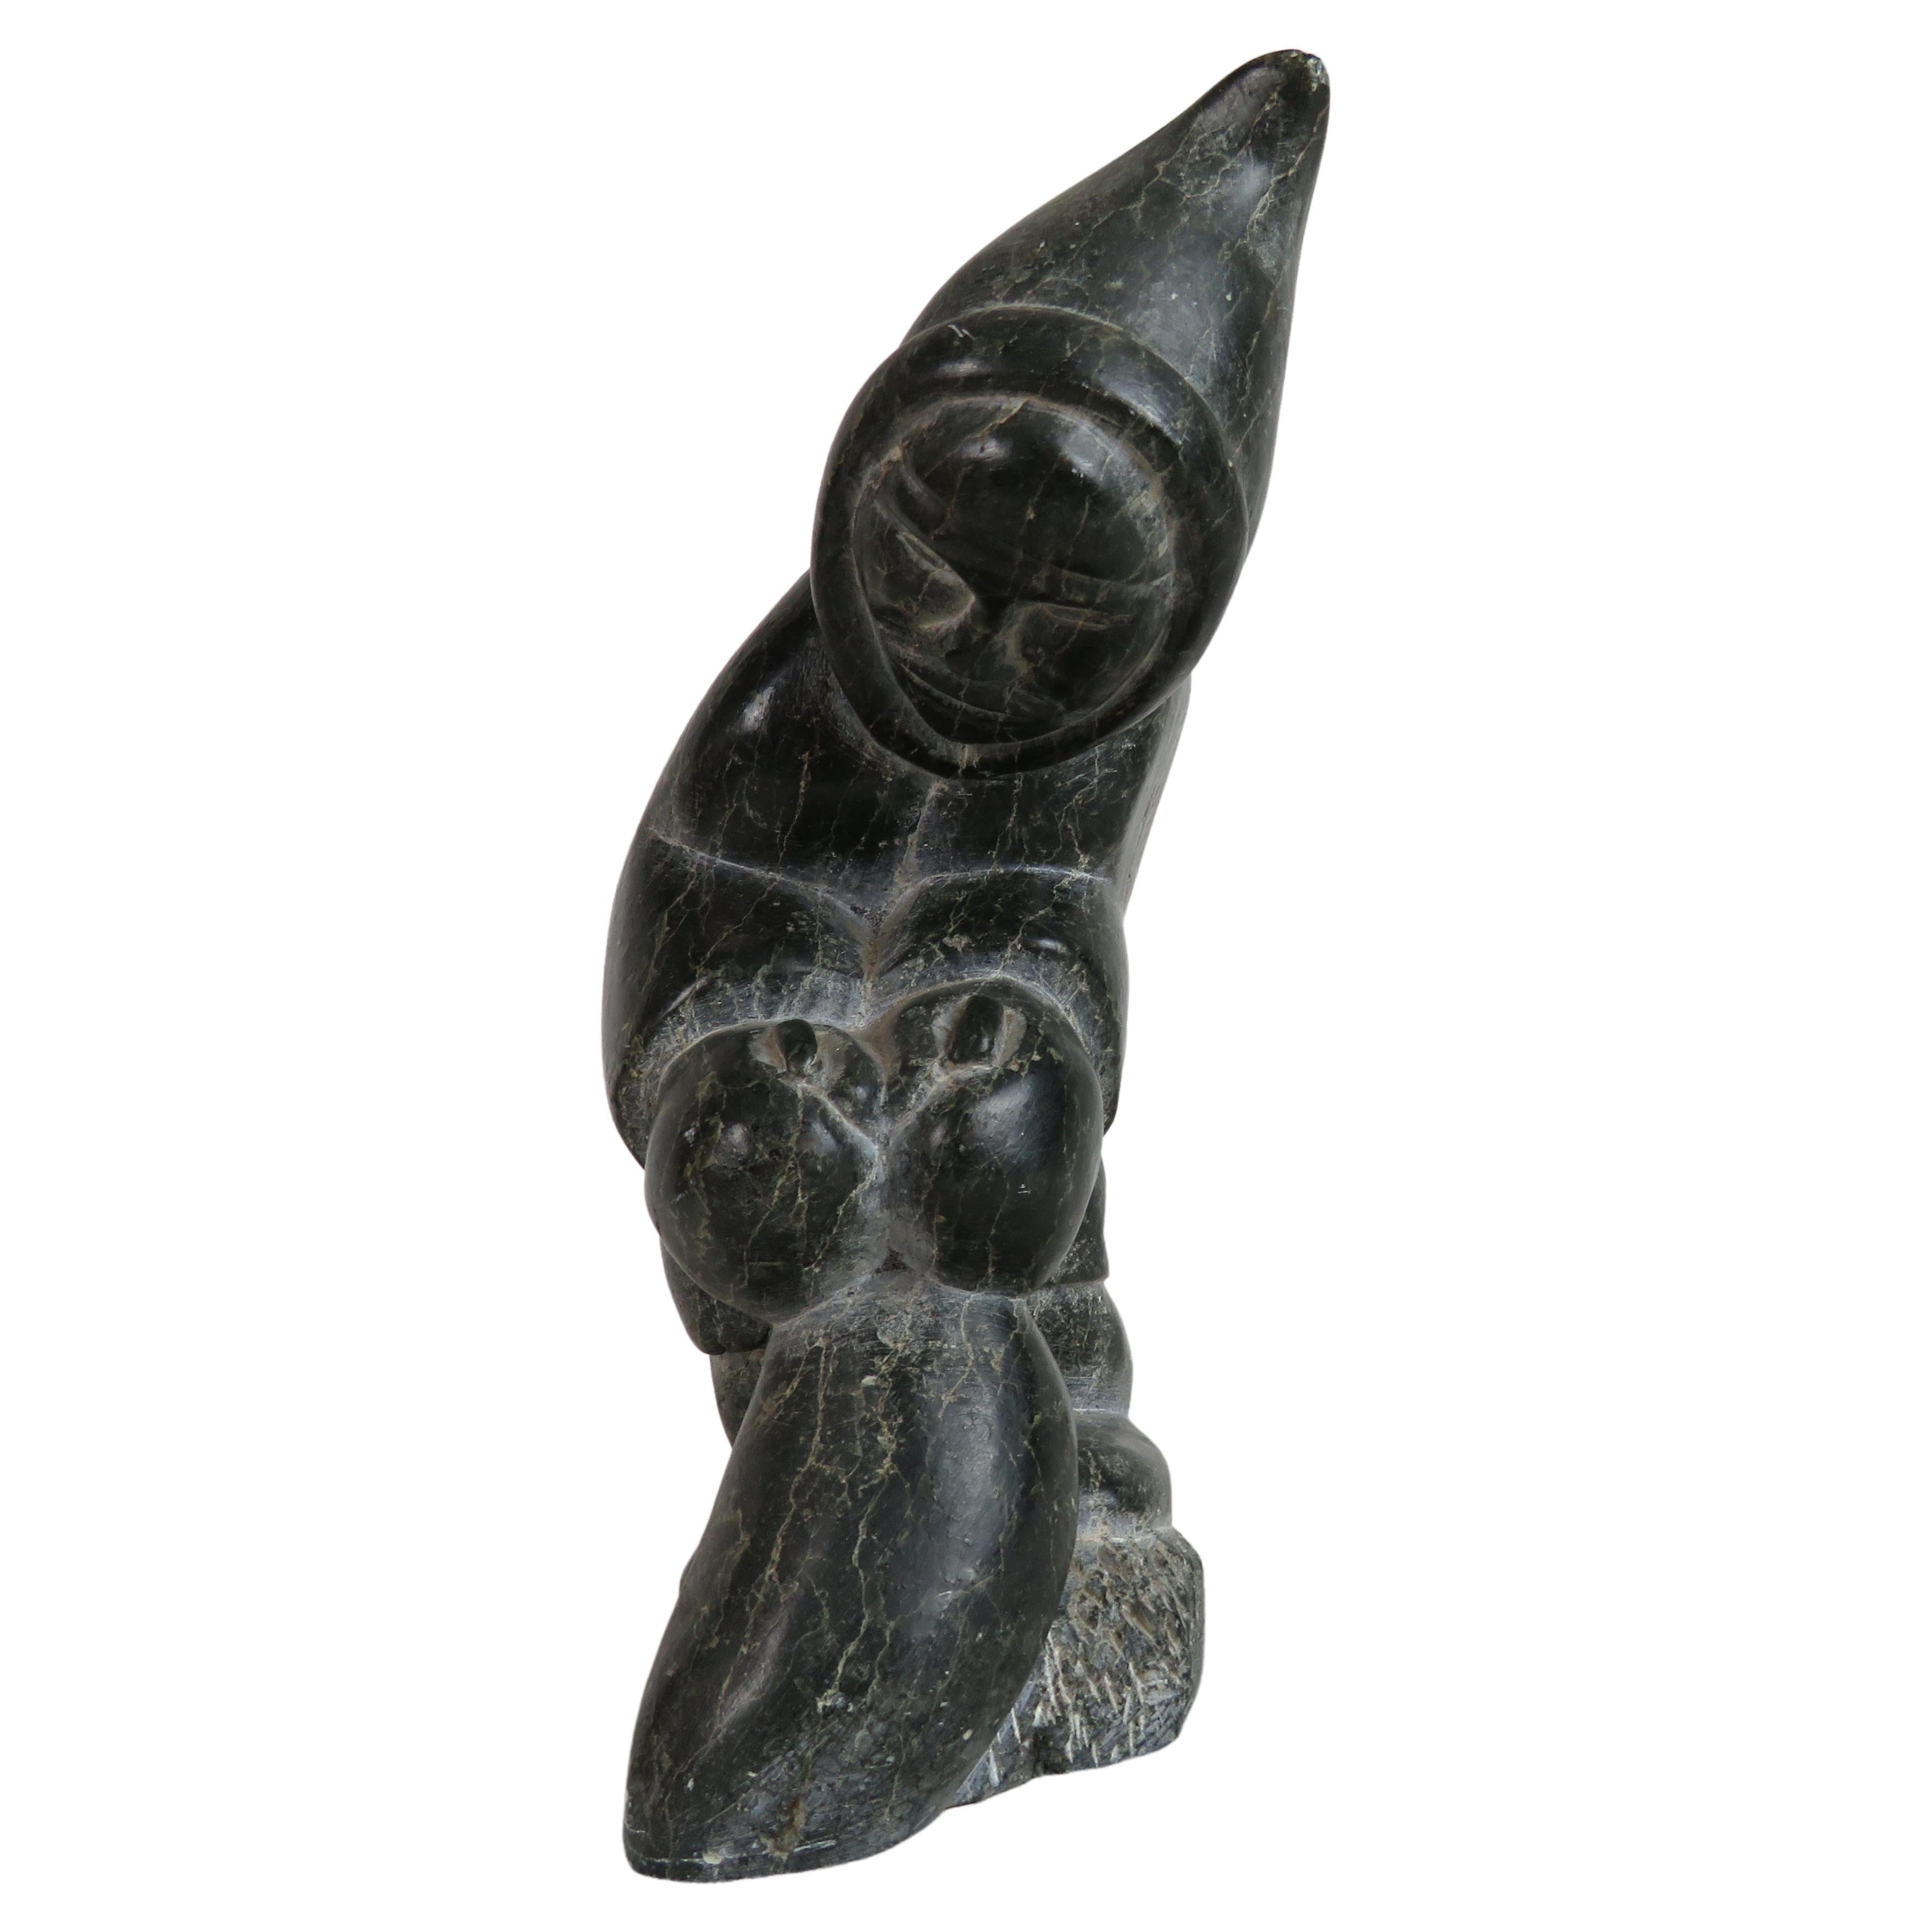 Carved Soapstone Sculpture of an Inuit Leaning Forward, Holding Bag at Feet